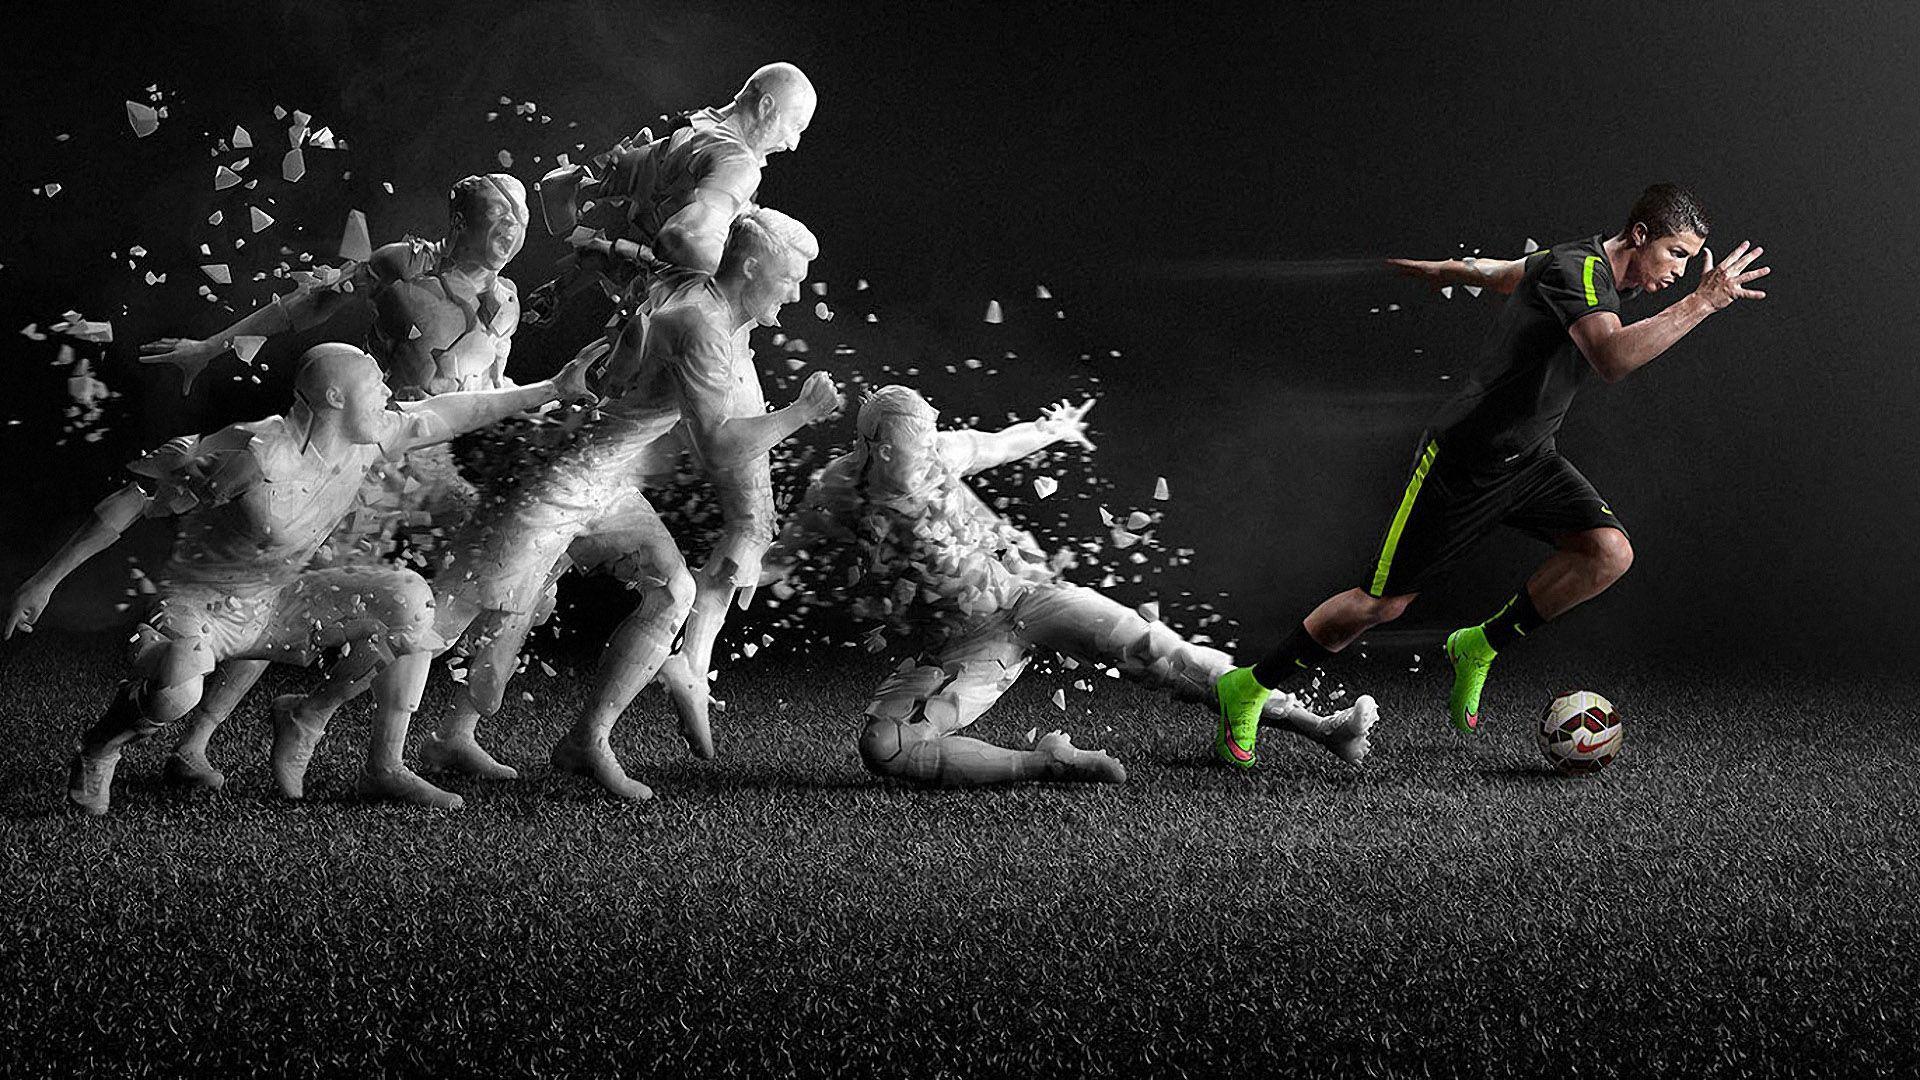 Nike Soccer Wallpaper 39 Nike Soccer 2015 Android Compatible